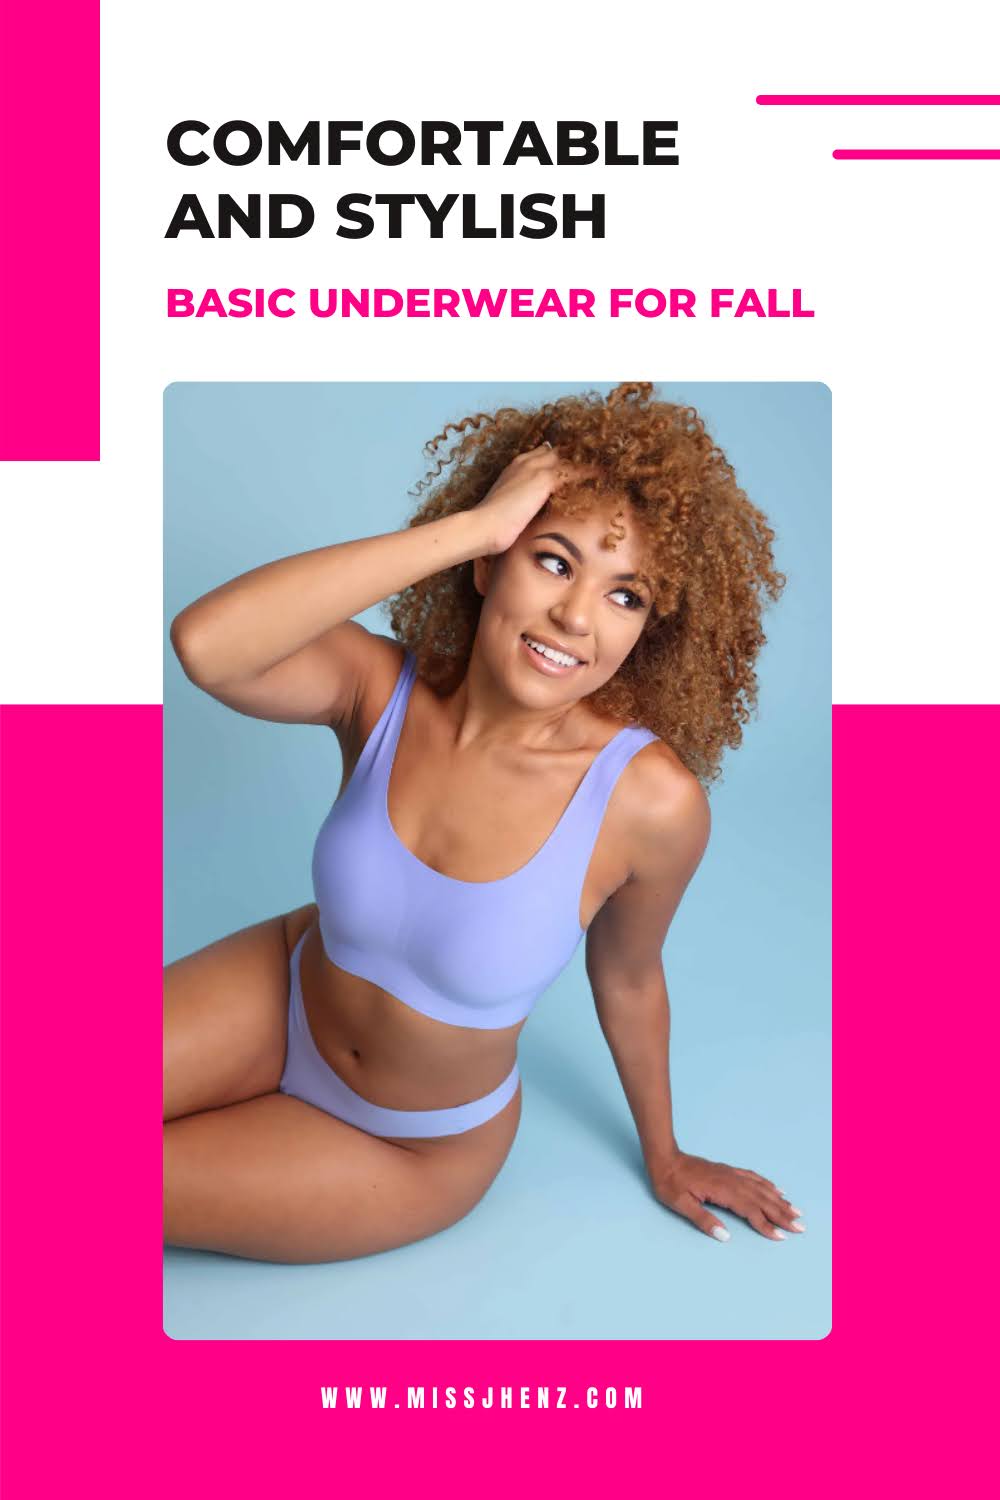 Comfortable and stylish basic underwear for fall